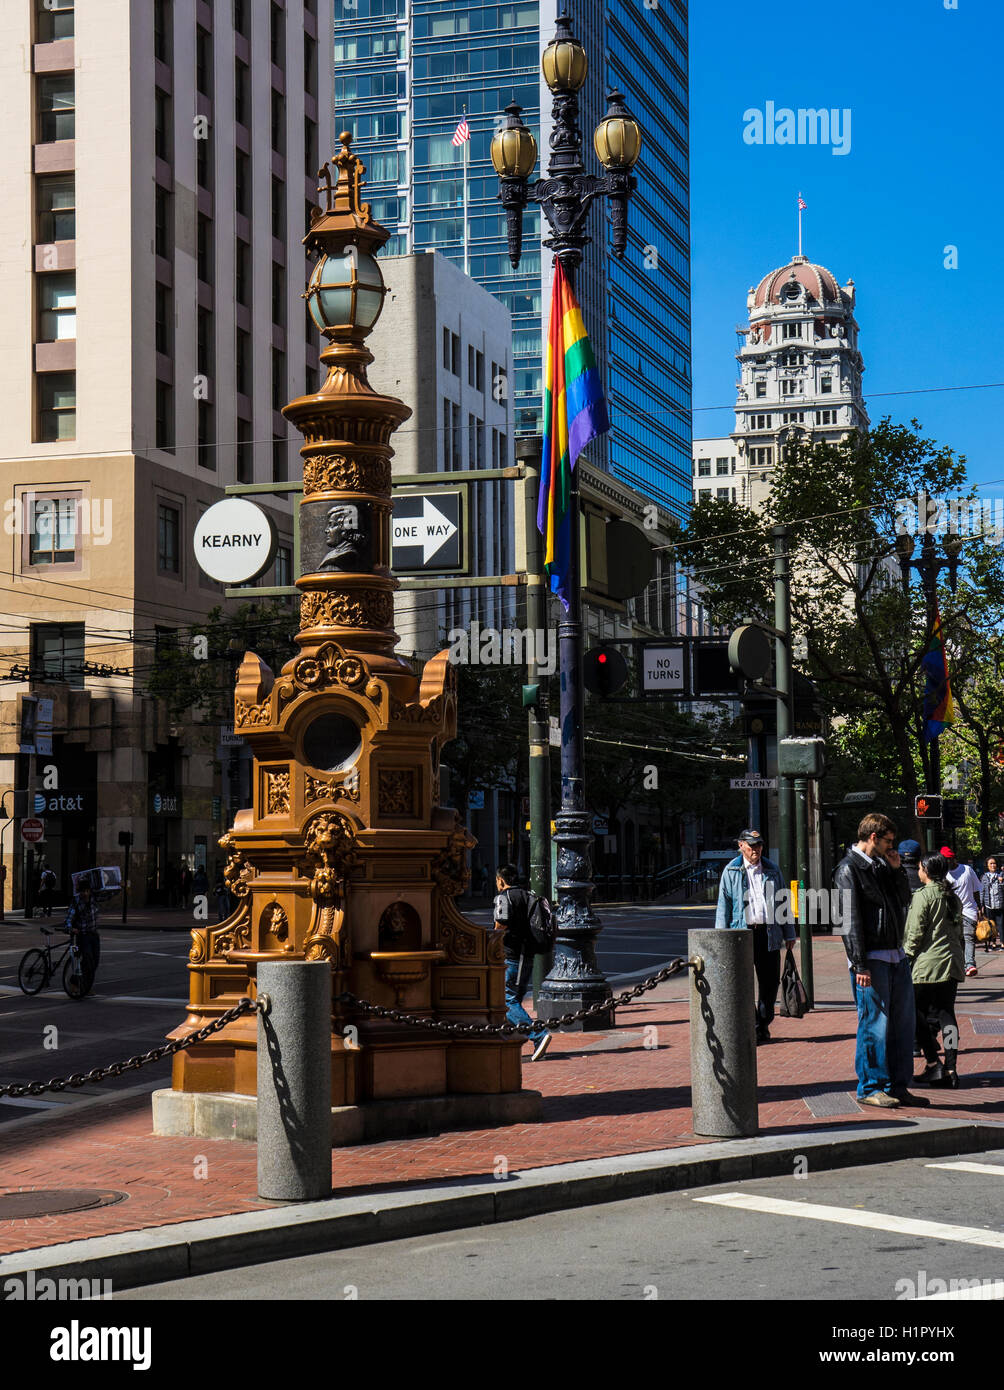 Luisa Terazzini, famous opera star gave San Francisco a gift that stands at  Kearny and Market Streets in San Francisco Stock Photo